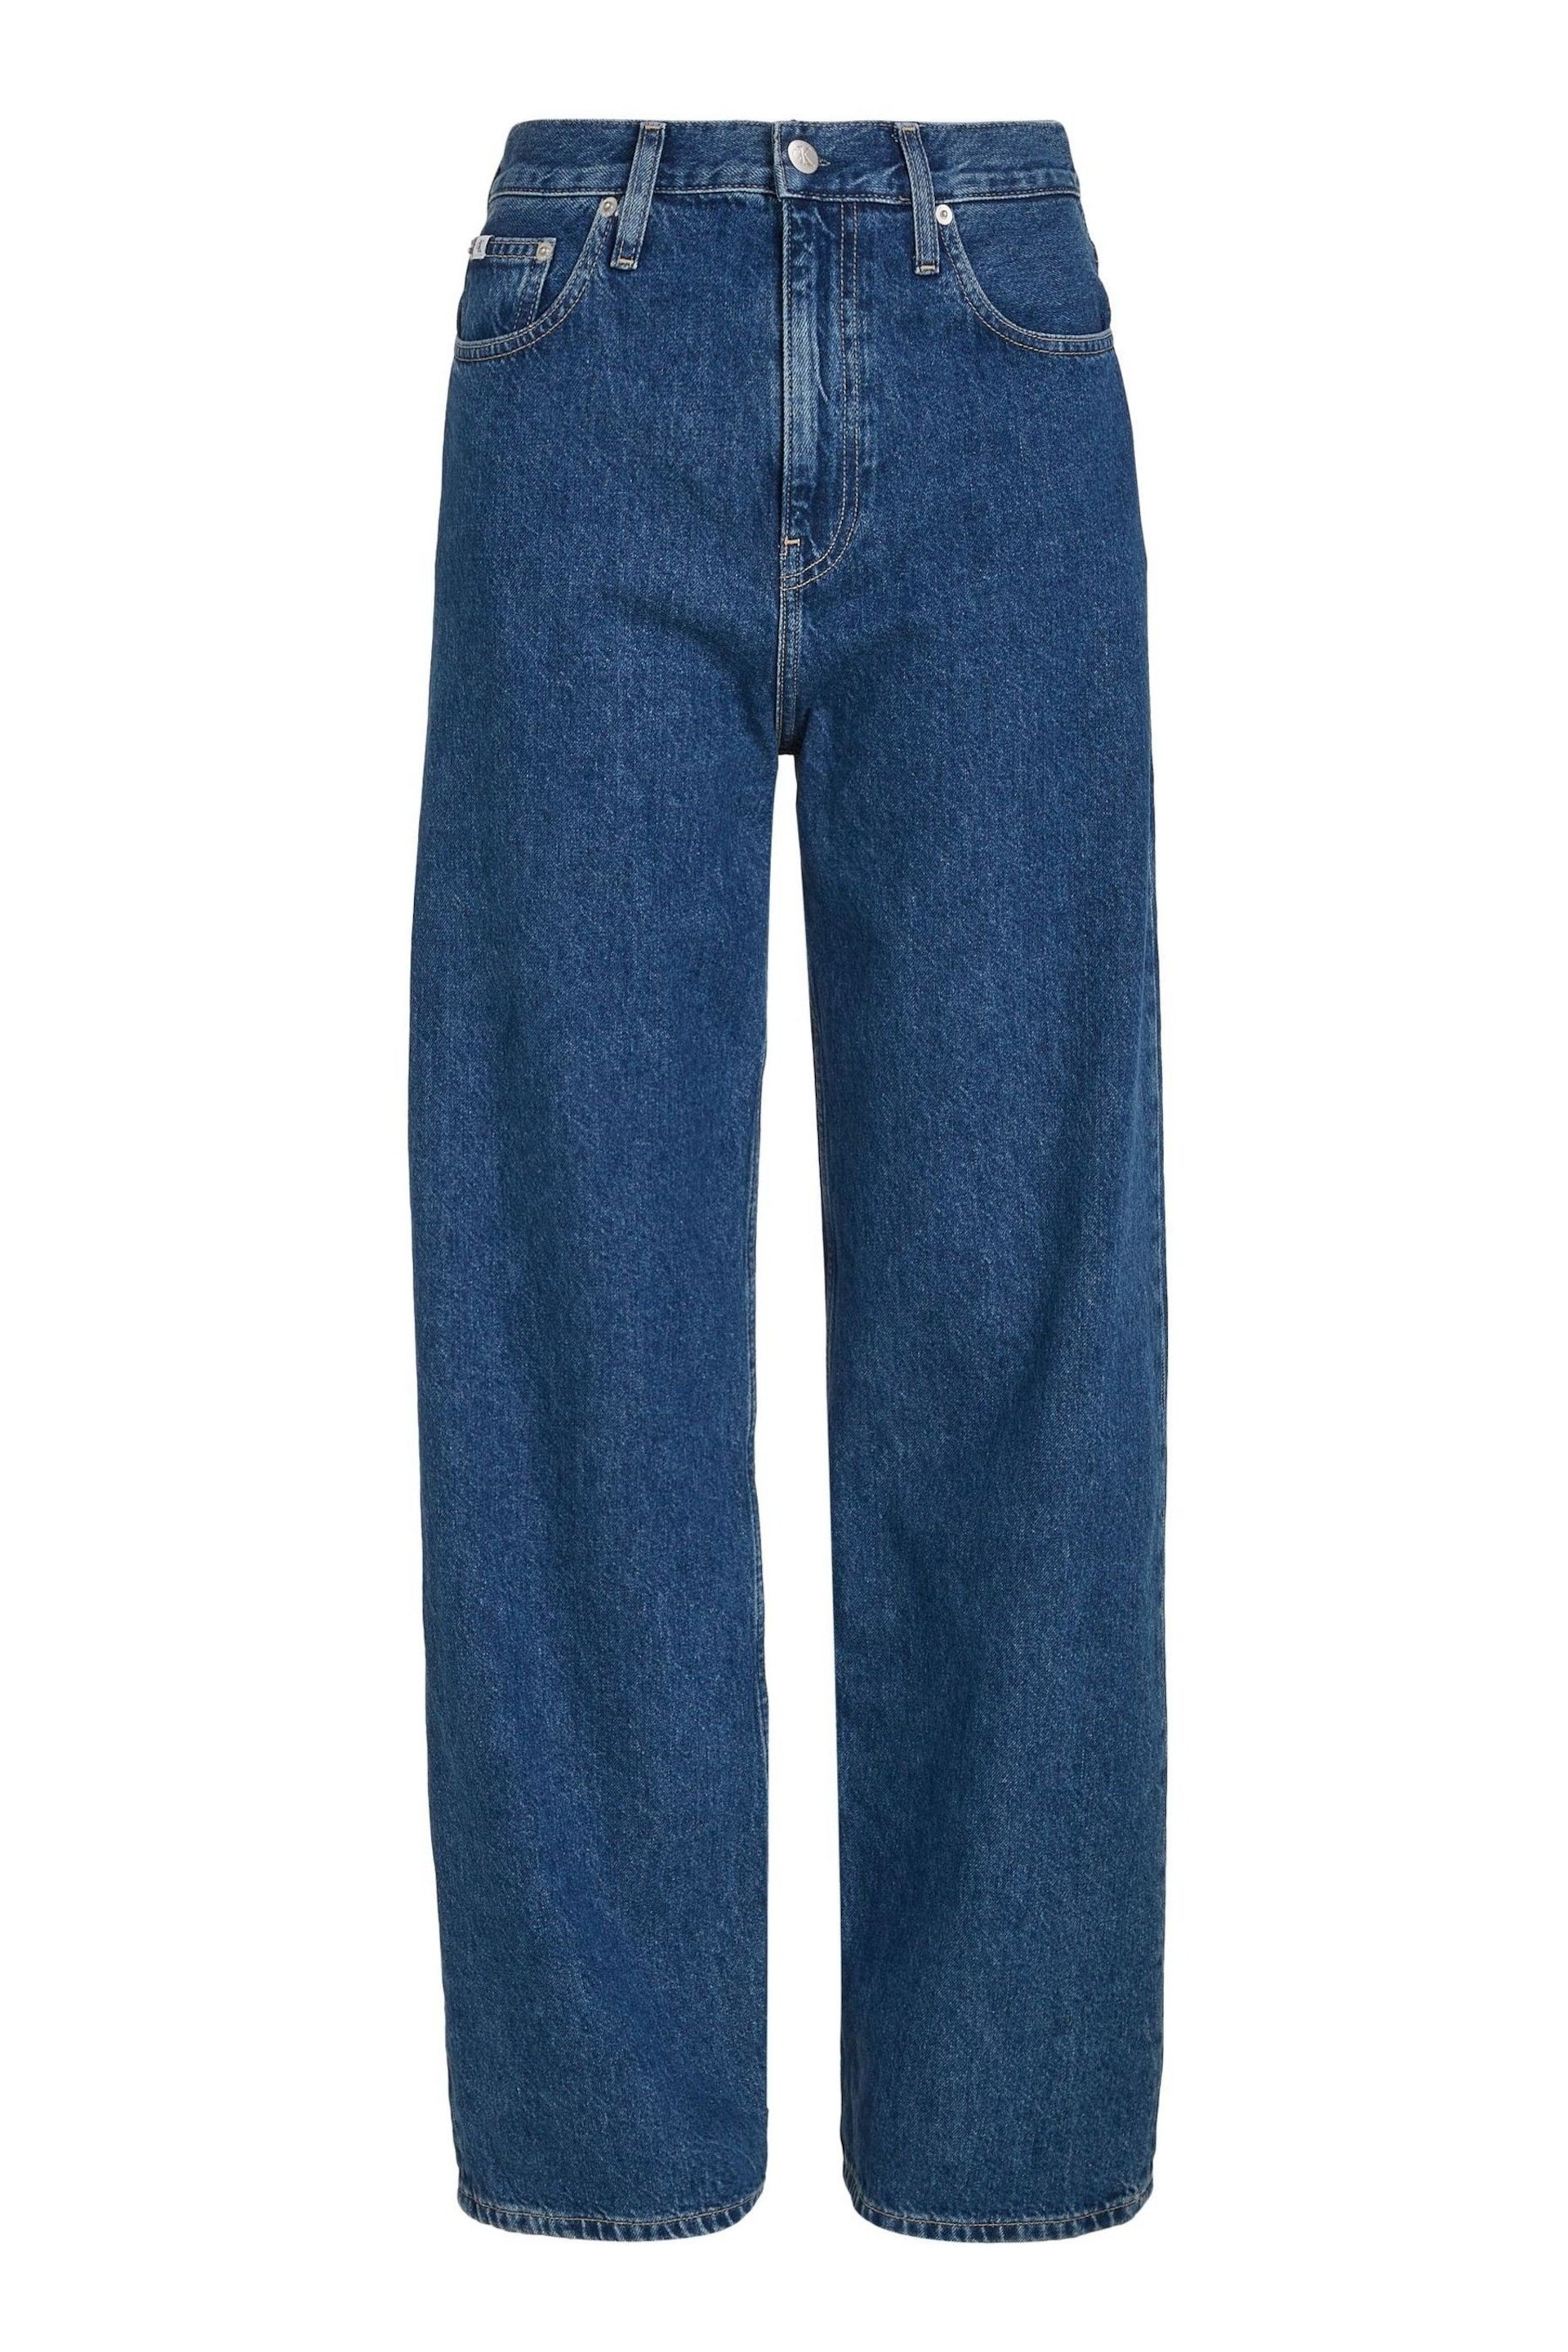 Calvin Klein Blue Low Rise Baggy Jeans - Image 4 of 6